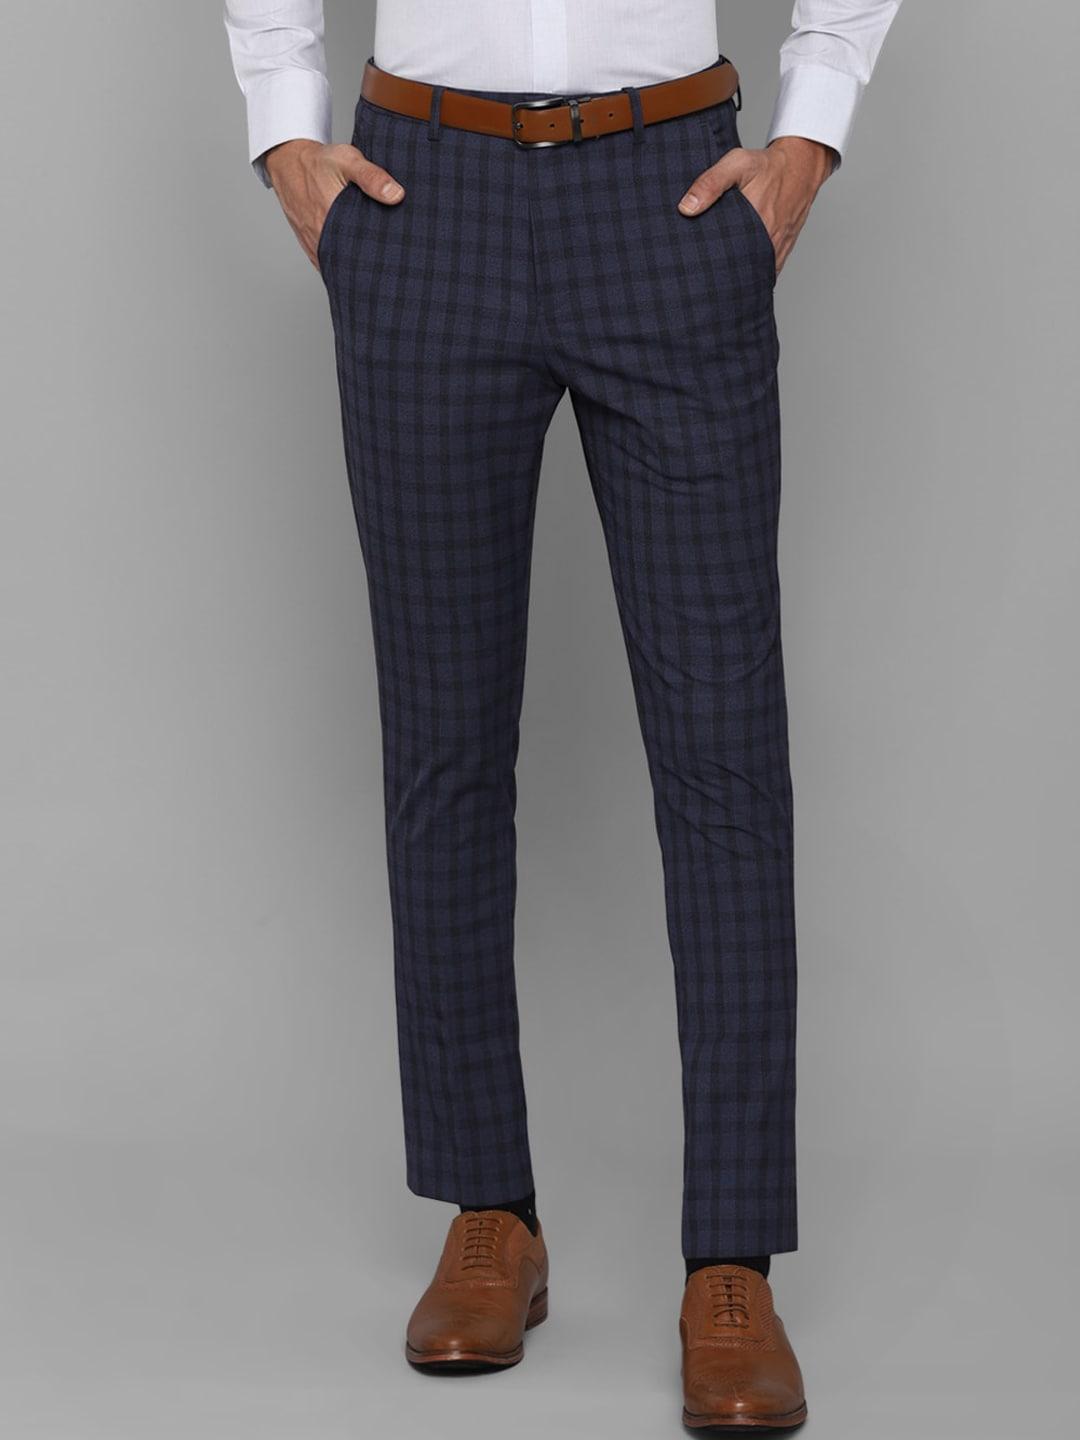 louis-philippe-men-navy-blue-checked-trousers